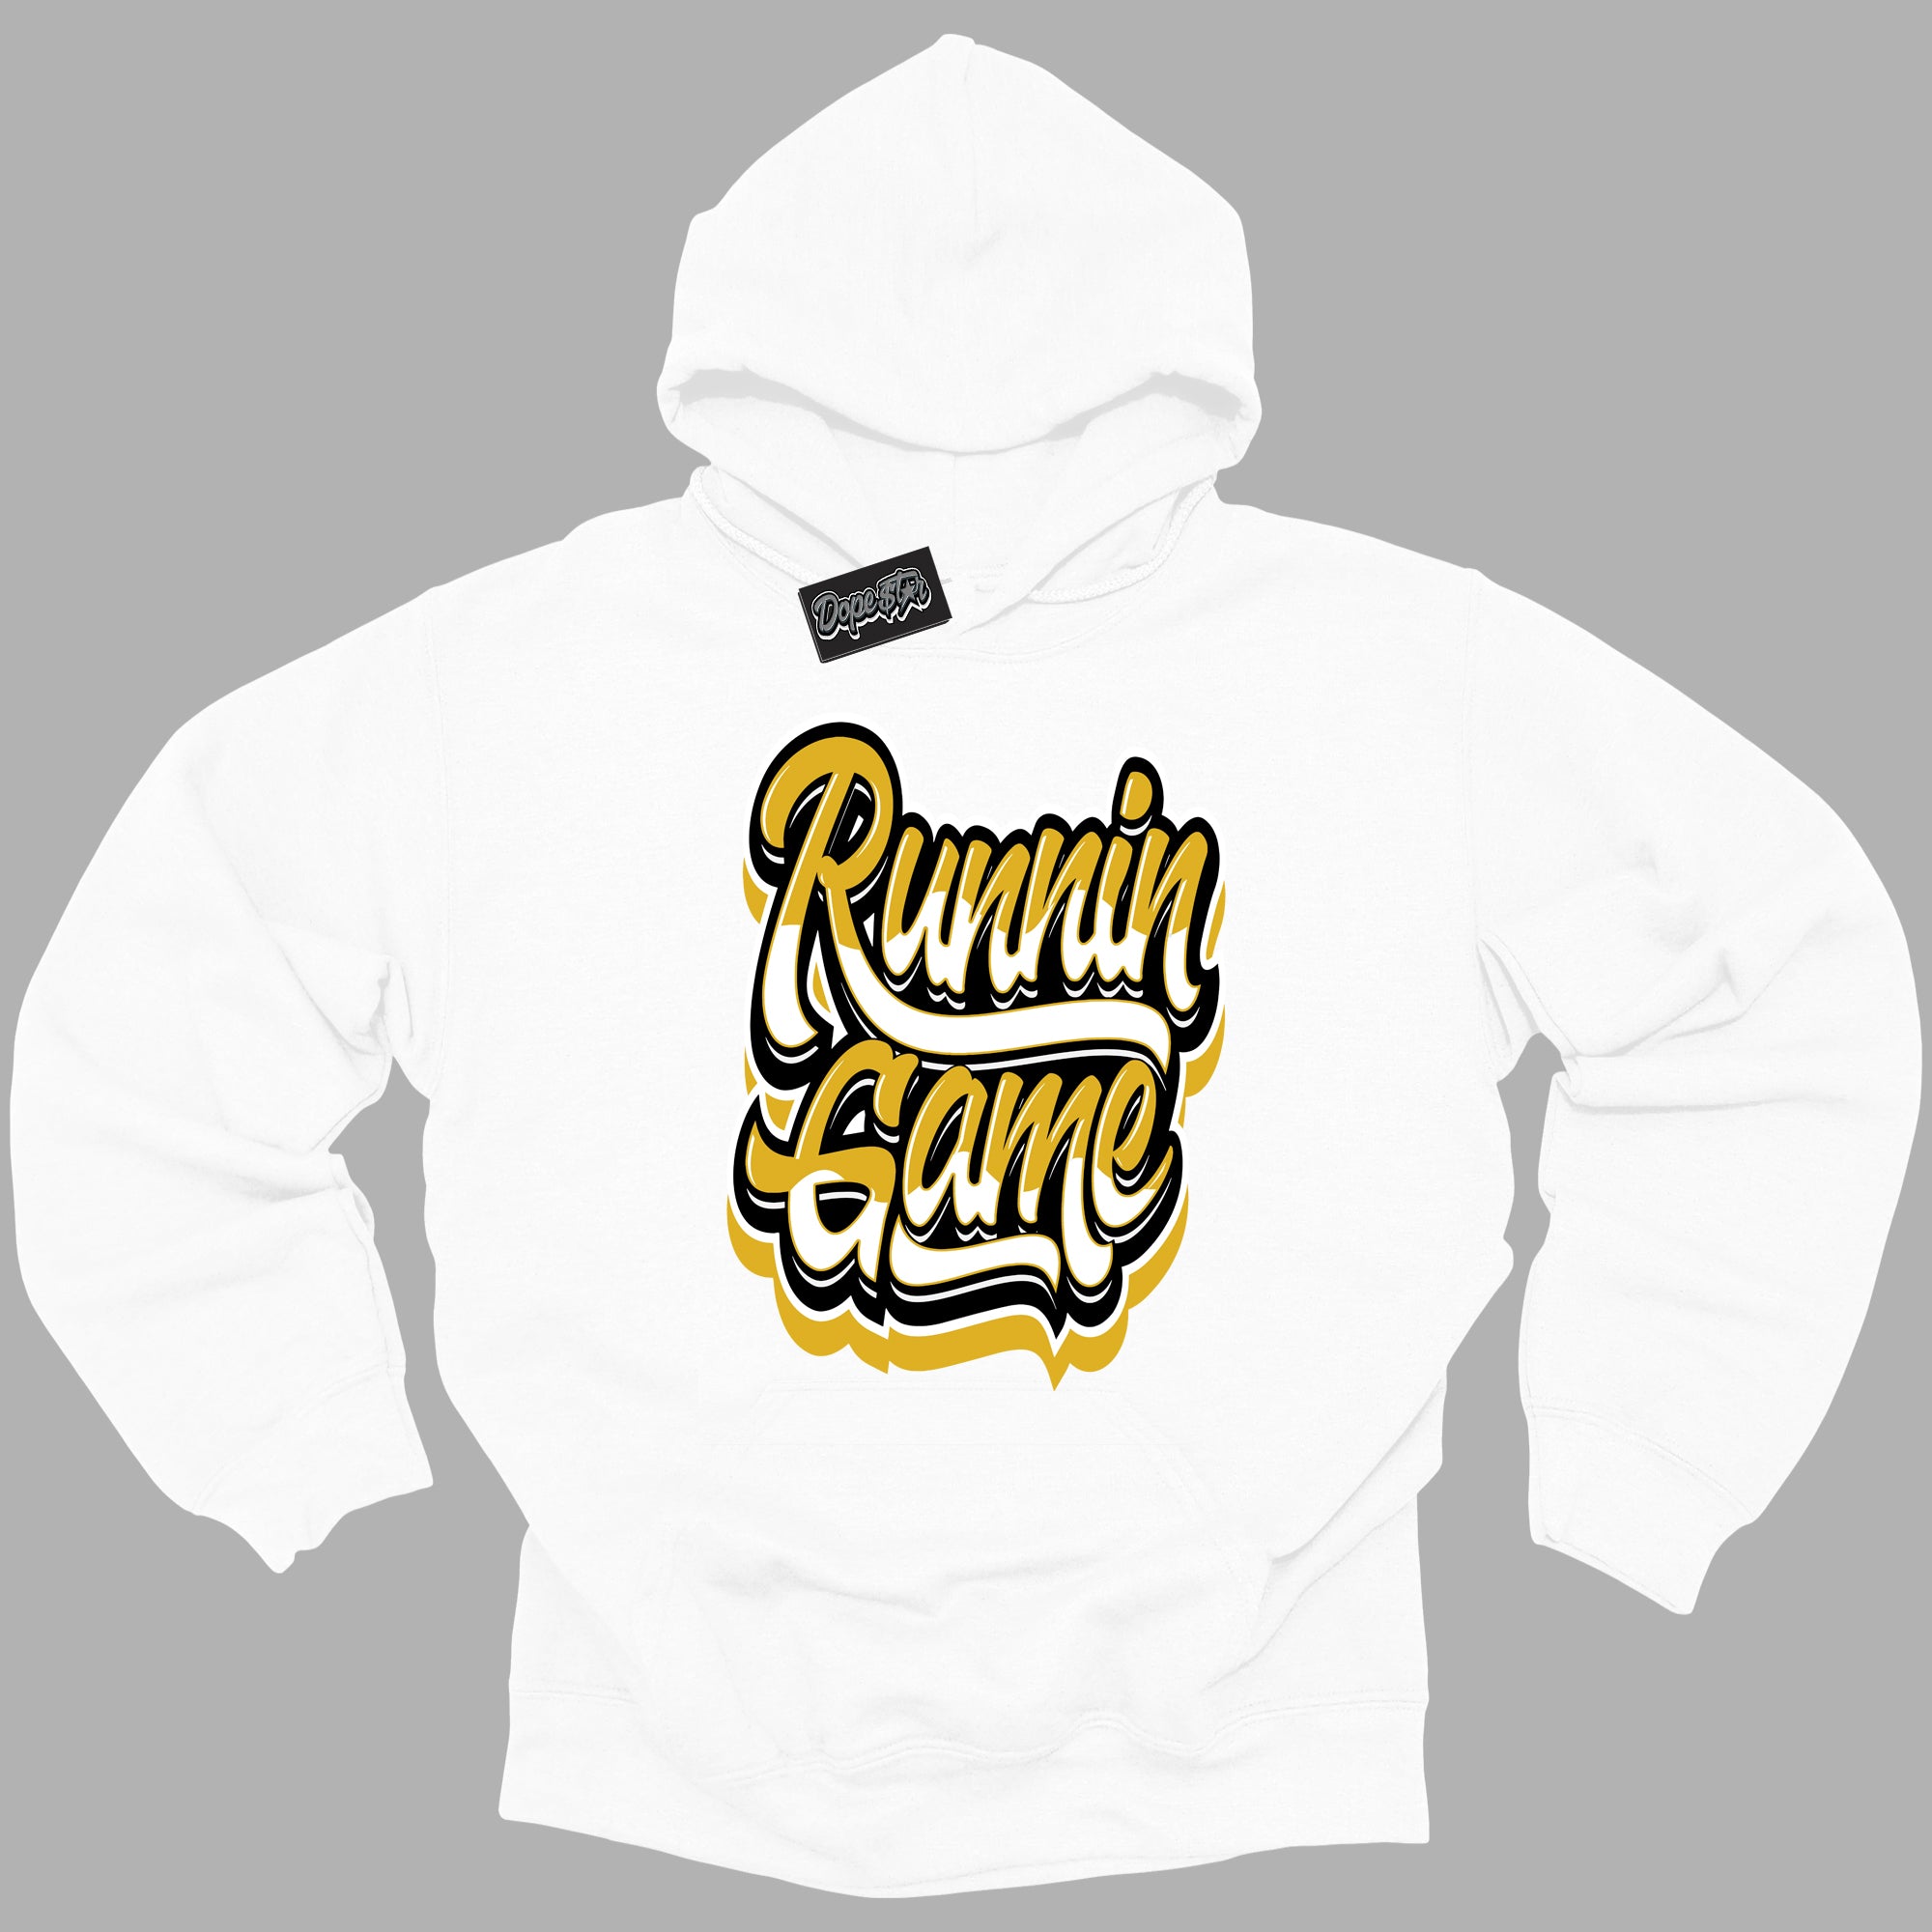 Cool White Hoodie with “ Running Game ”  design that Perfectly Matches Yellow Ochre 6s Sneakers.